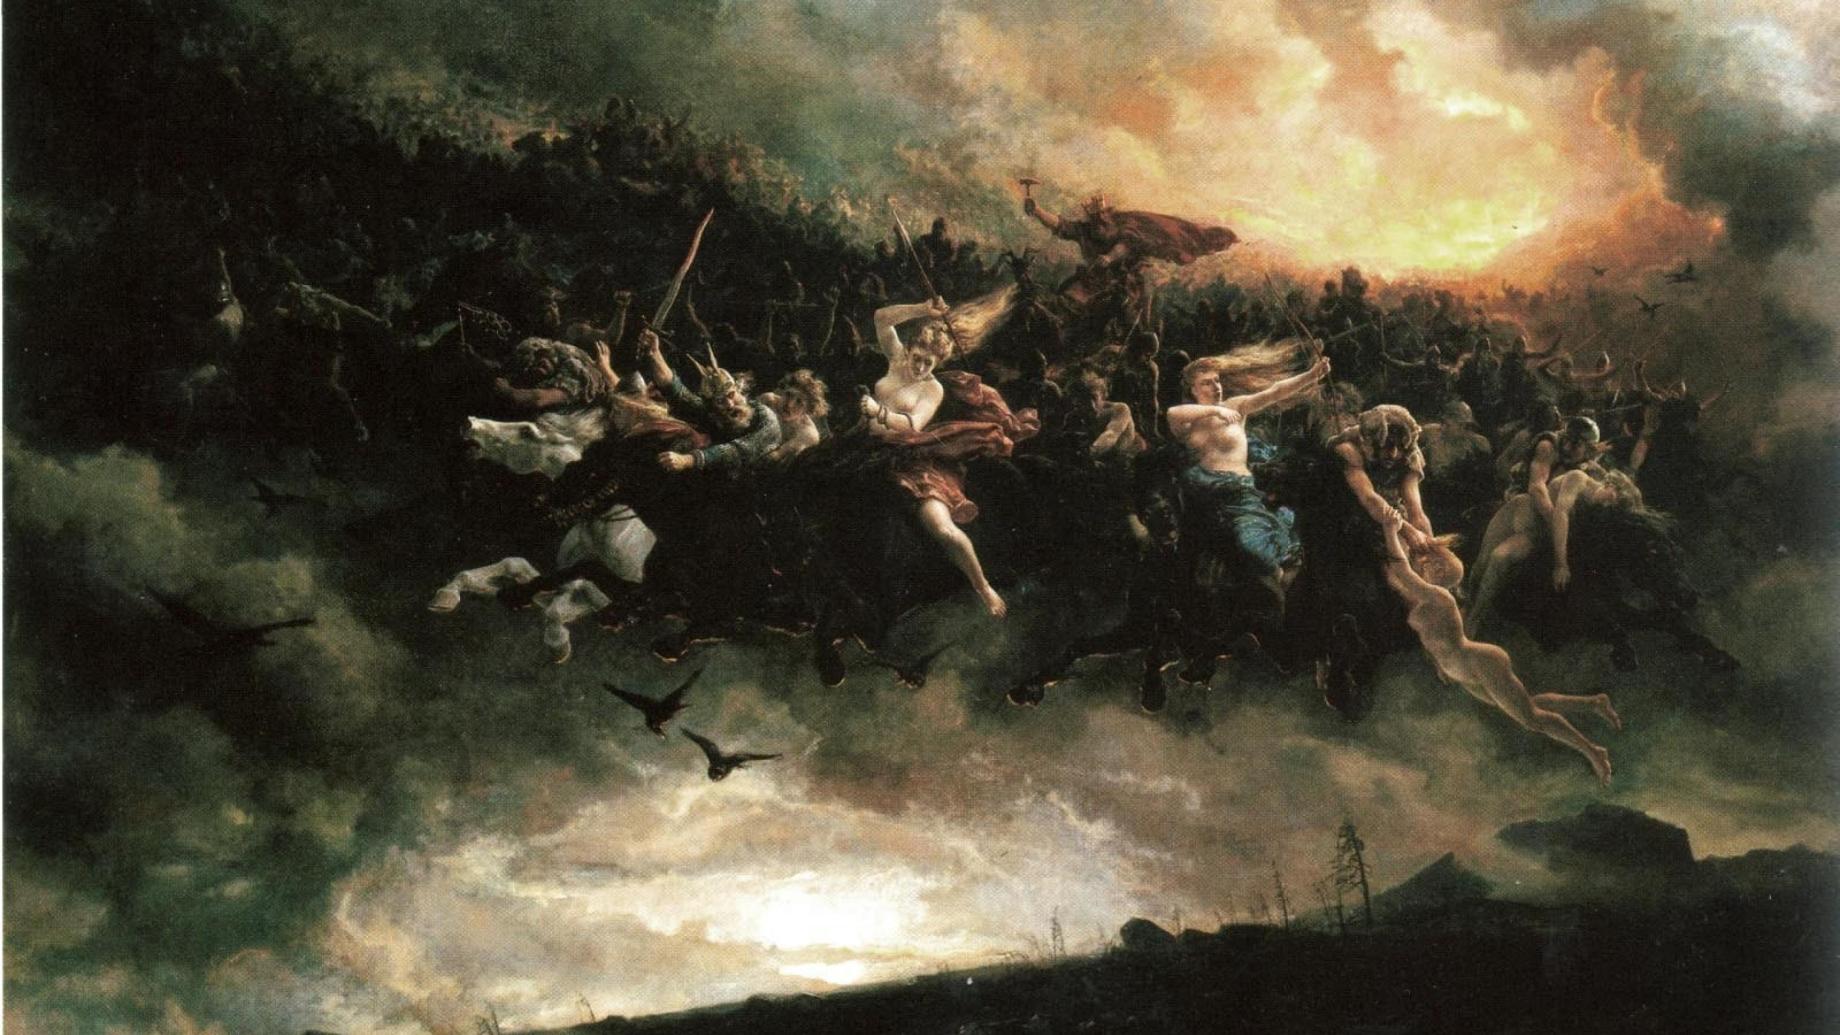 Åsgårdsreien by Peter Nicolai Arbo, painting in oil on canvas, 1872. Currently residing at the National Gallery in Oslo, Norway. Here Thor holds Mjölnir aloft (center) as he leads a legion of men and women on a mythological hunt through the skies on the way to Asgard.